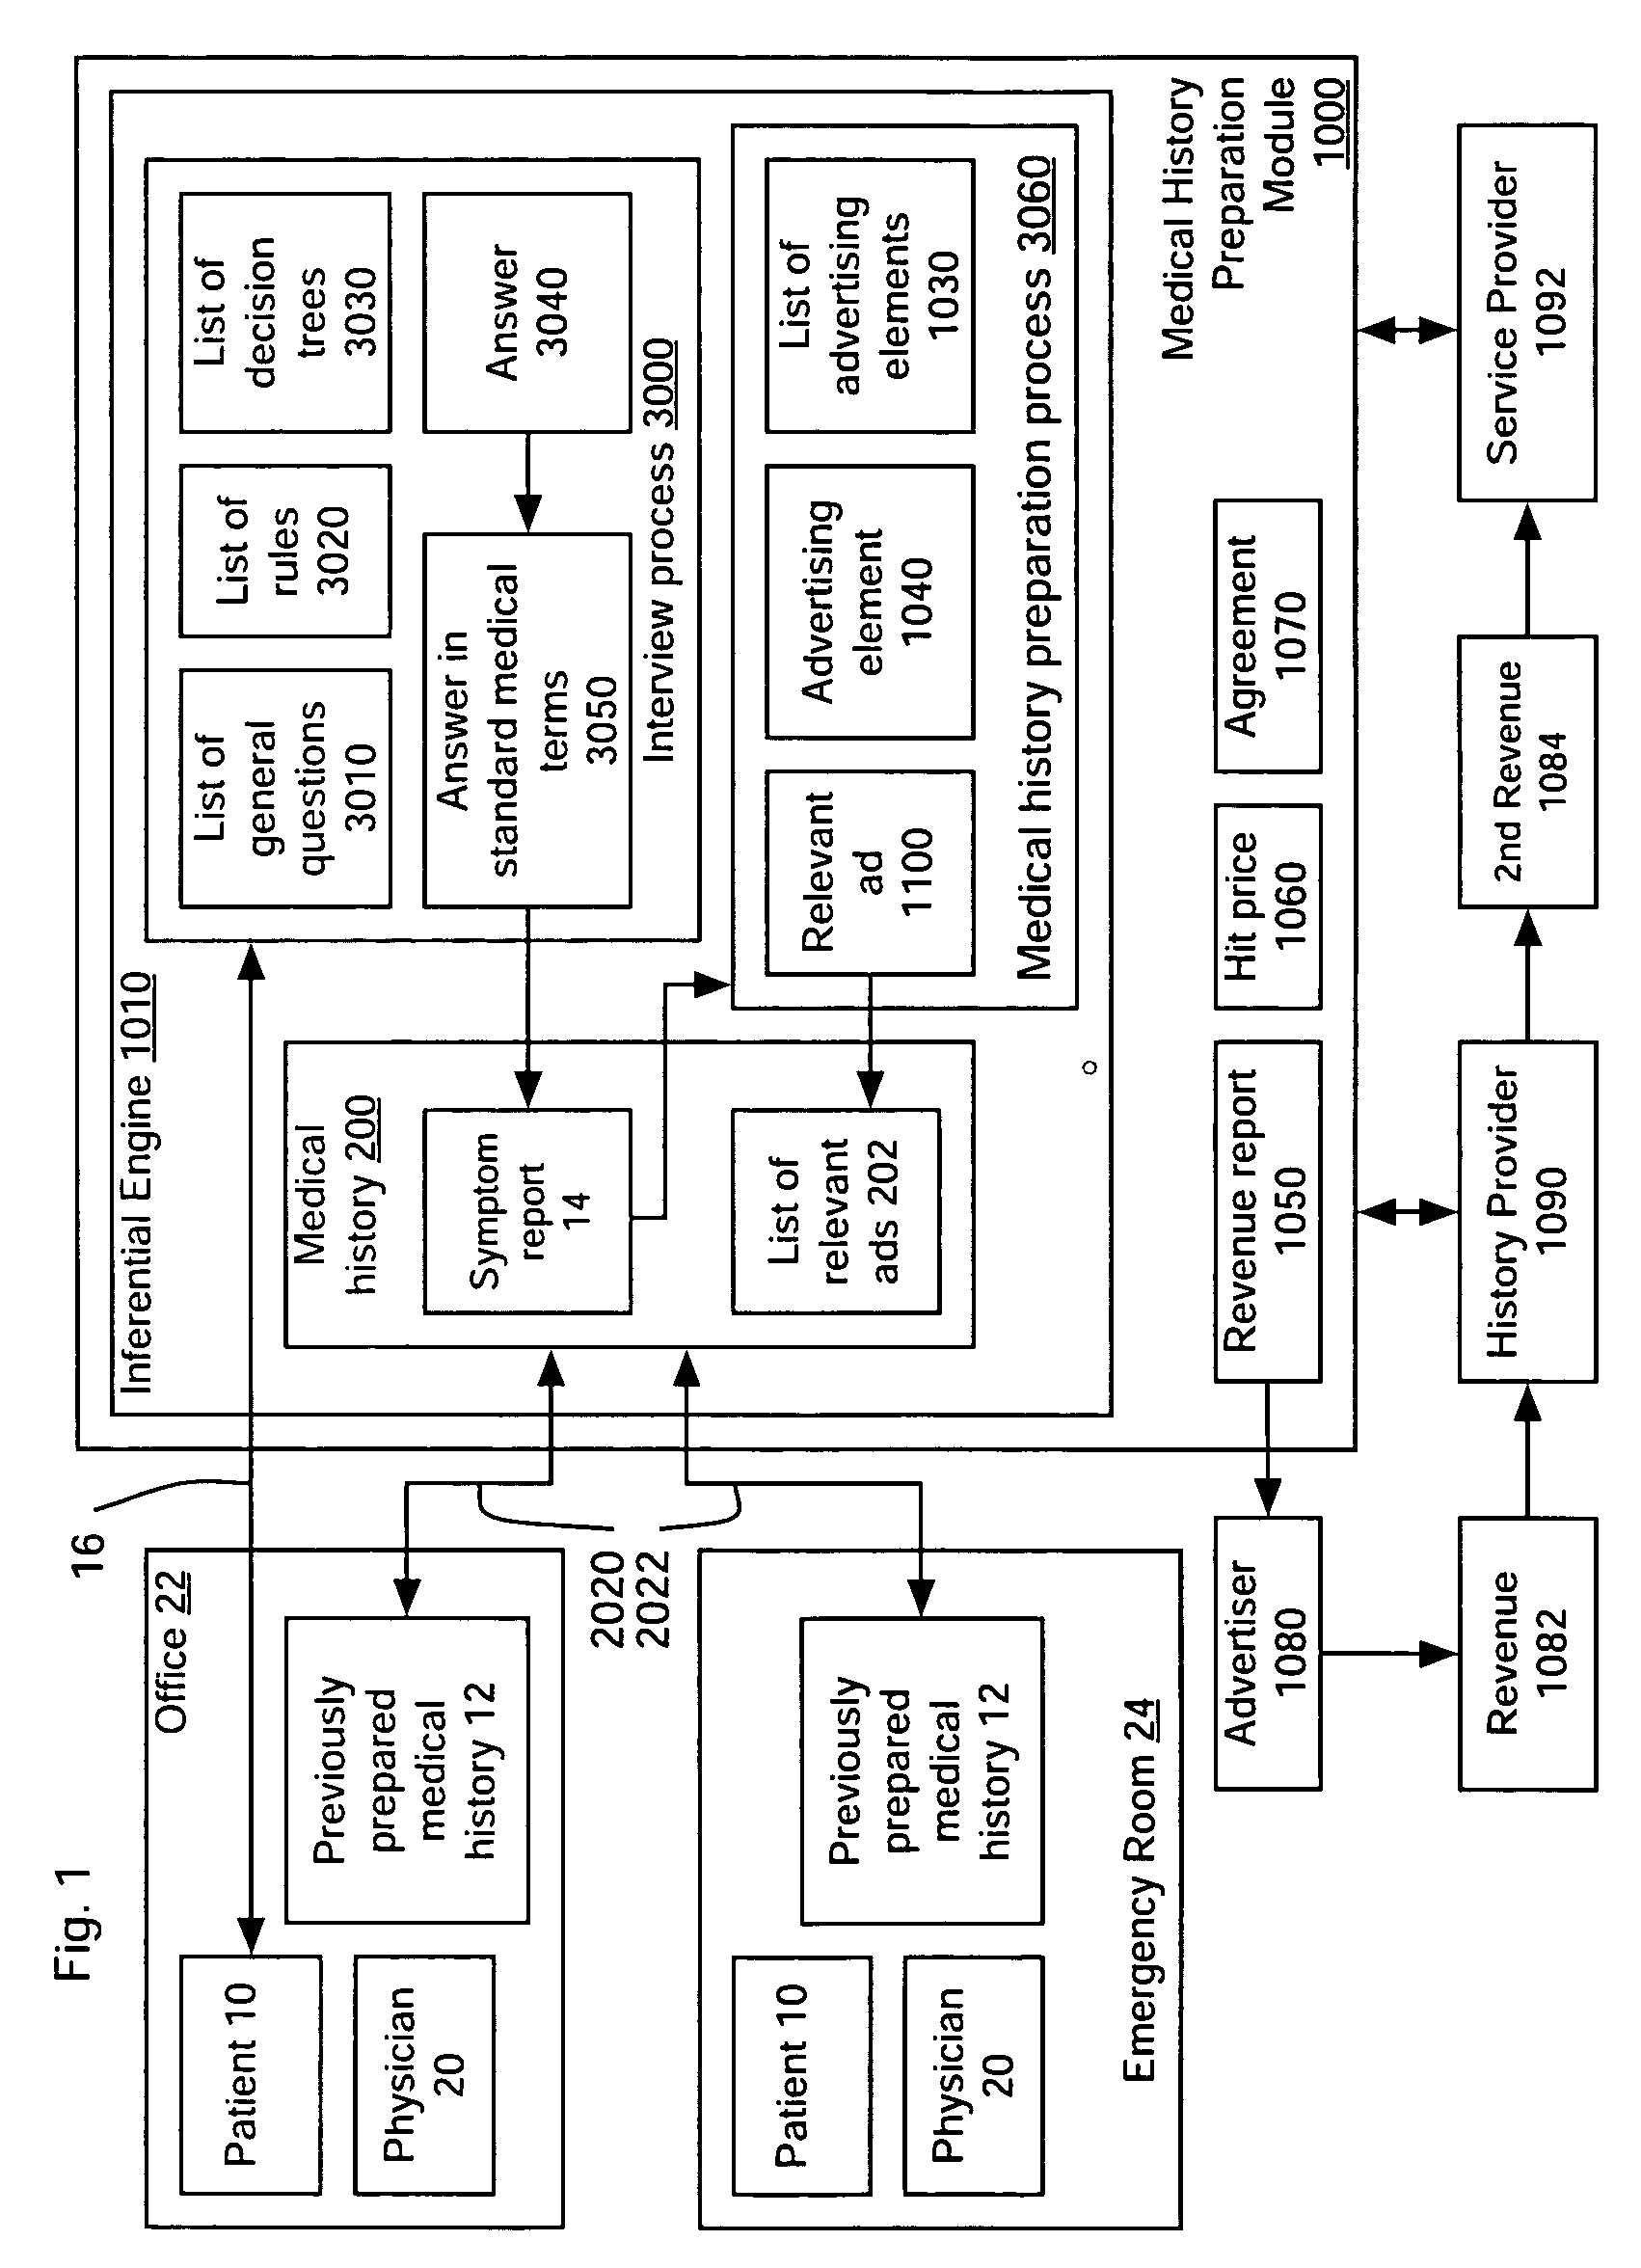 Method and apparatus creating, integrating, and using a patient medical history